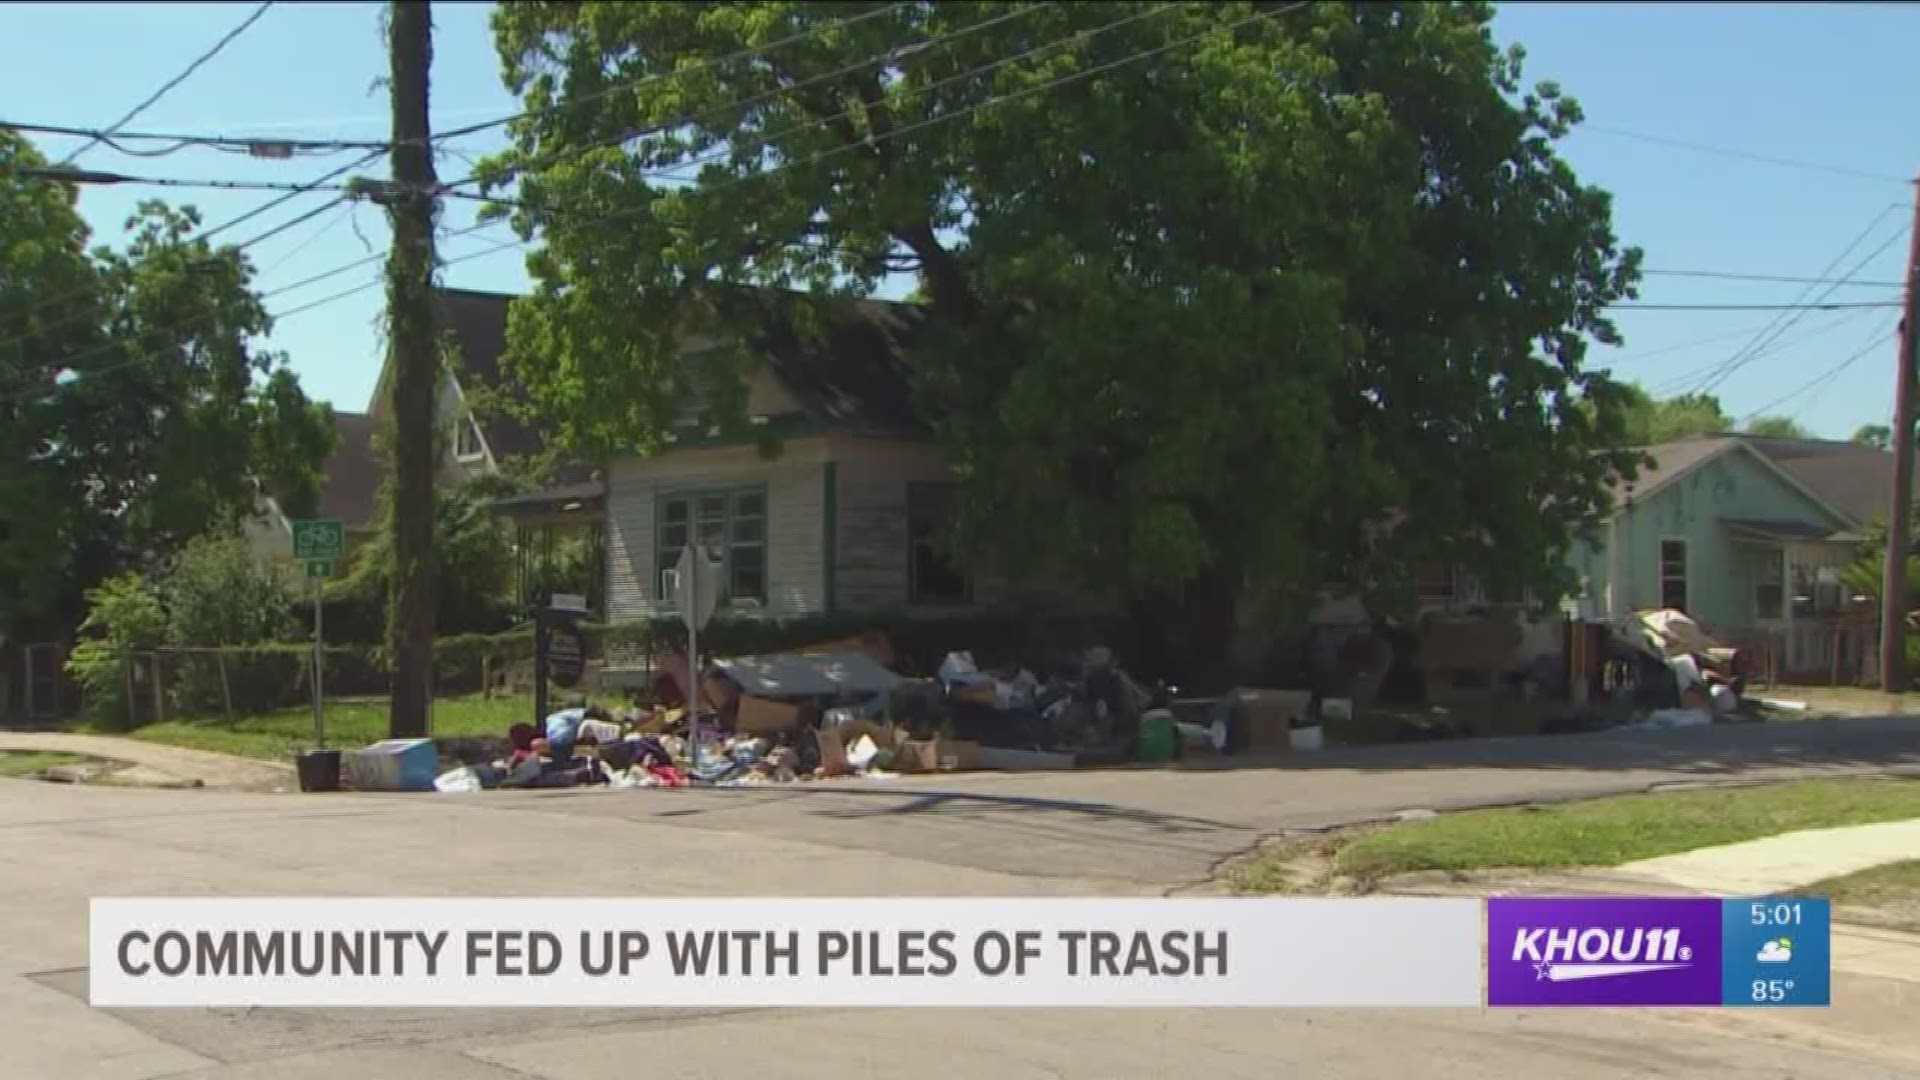 Neighbors are furious after residents left a huge pile of trash on a street in the 2nd Ward when they moved out of their home. 